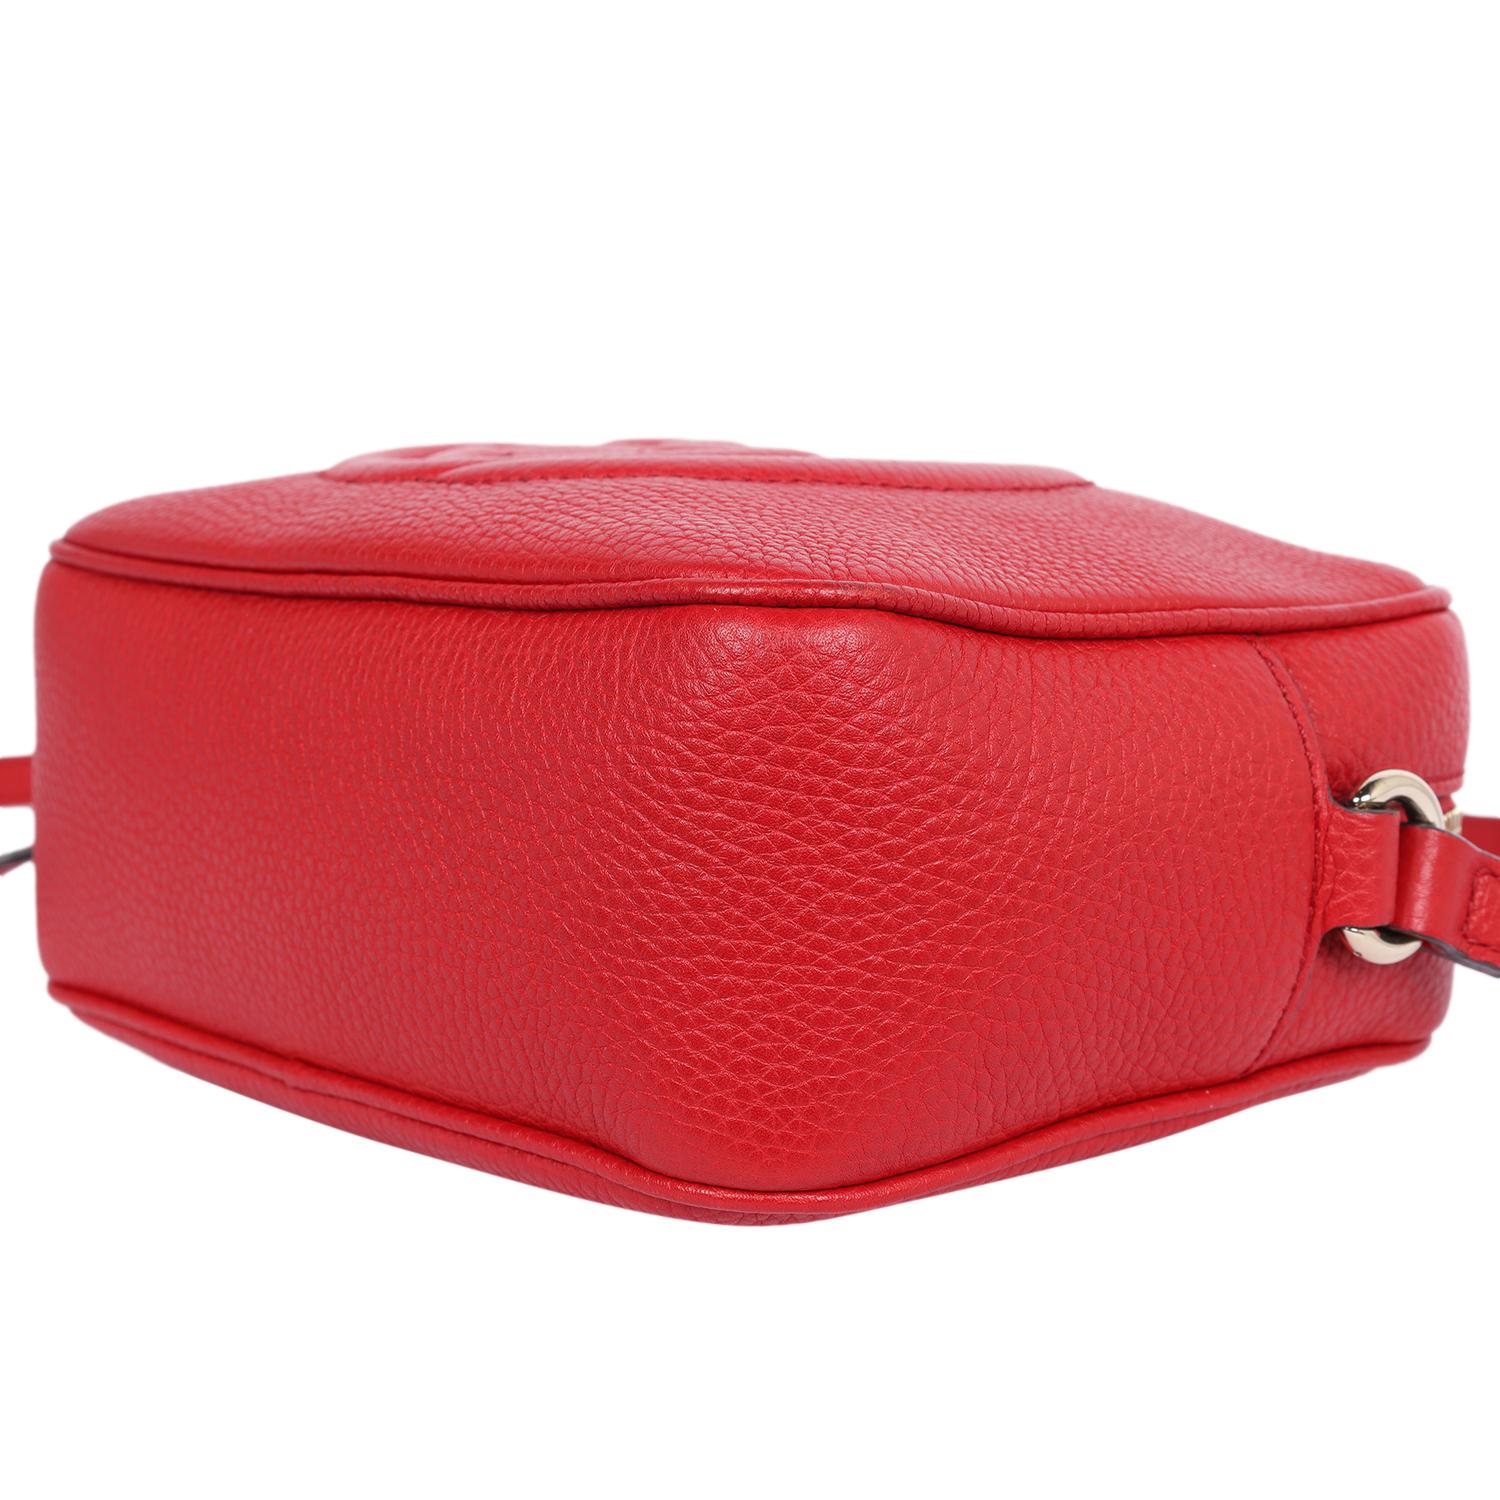 Gucci GG Red Soho Disco Leather Cross Body Bag For Sale 10